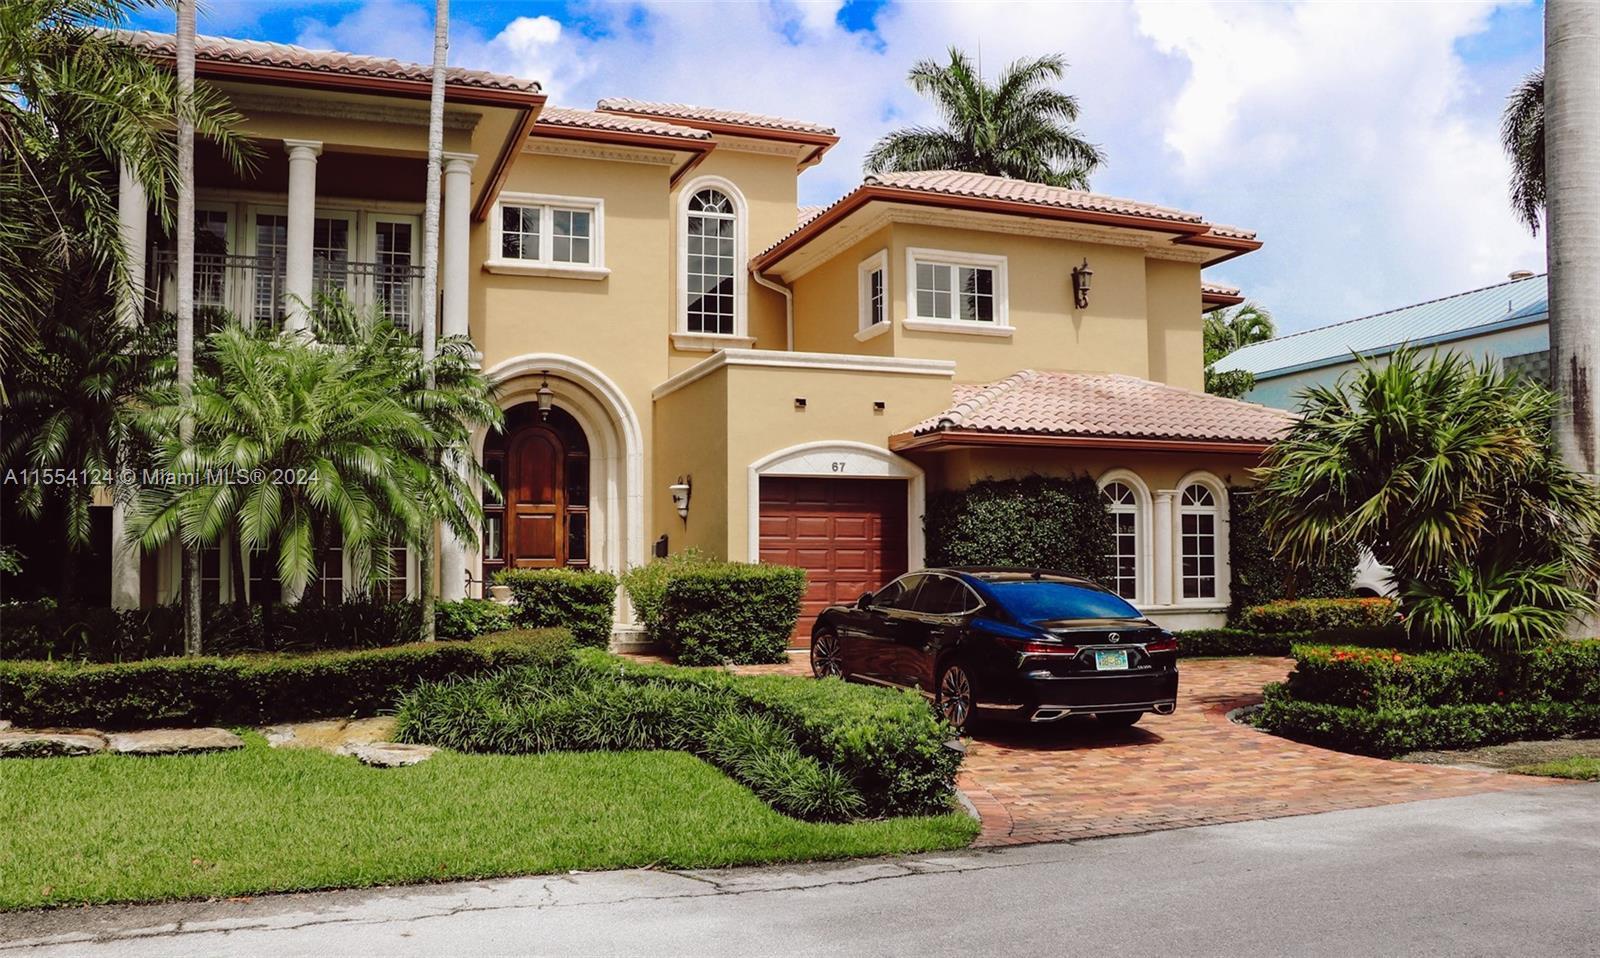 Photo of 67 Royal Palm Dr in Fort Lauderdale, FL